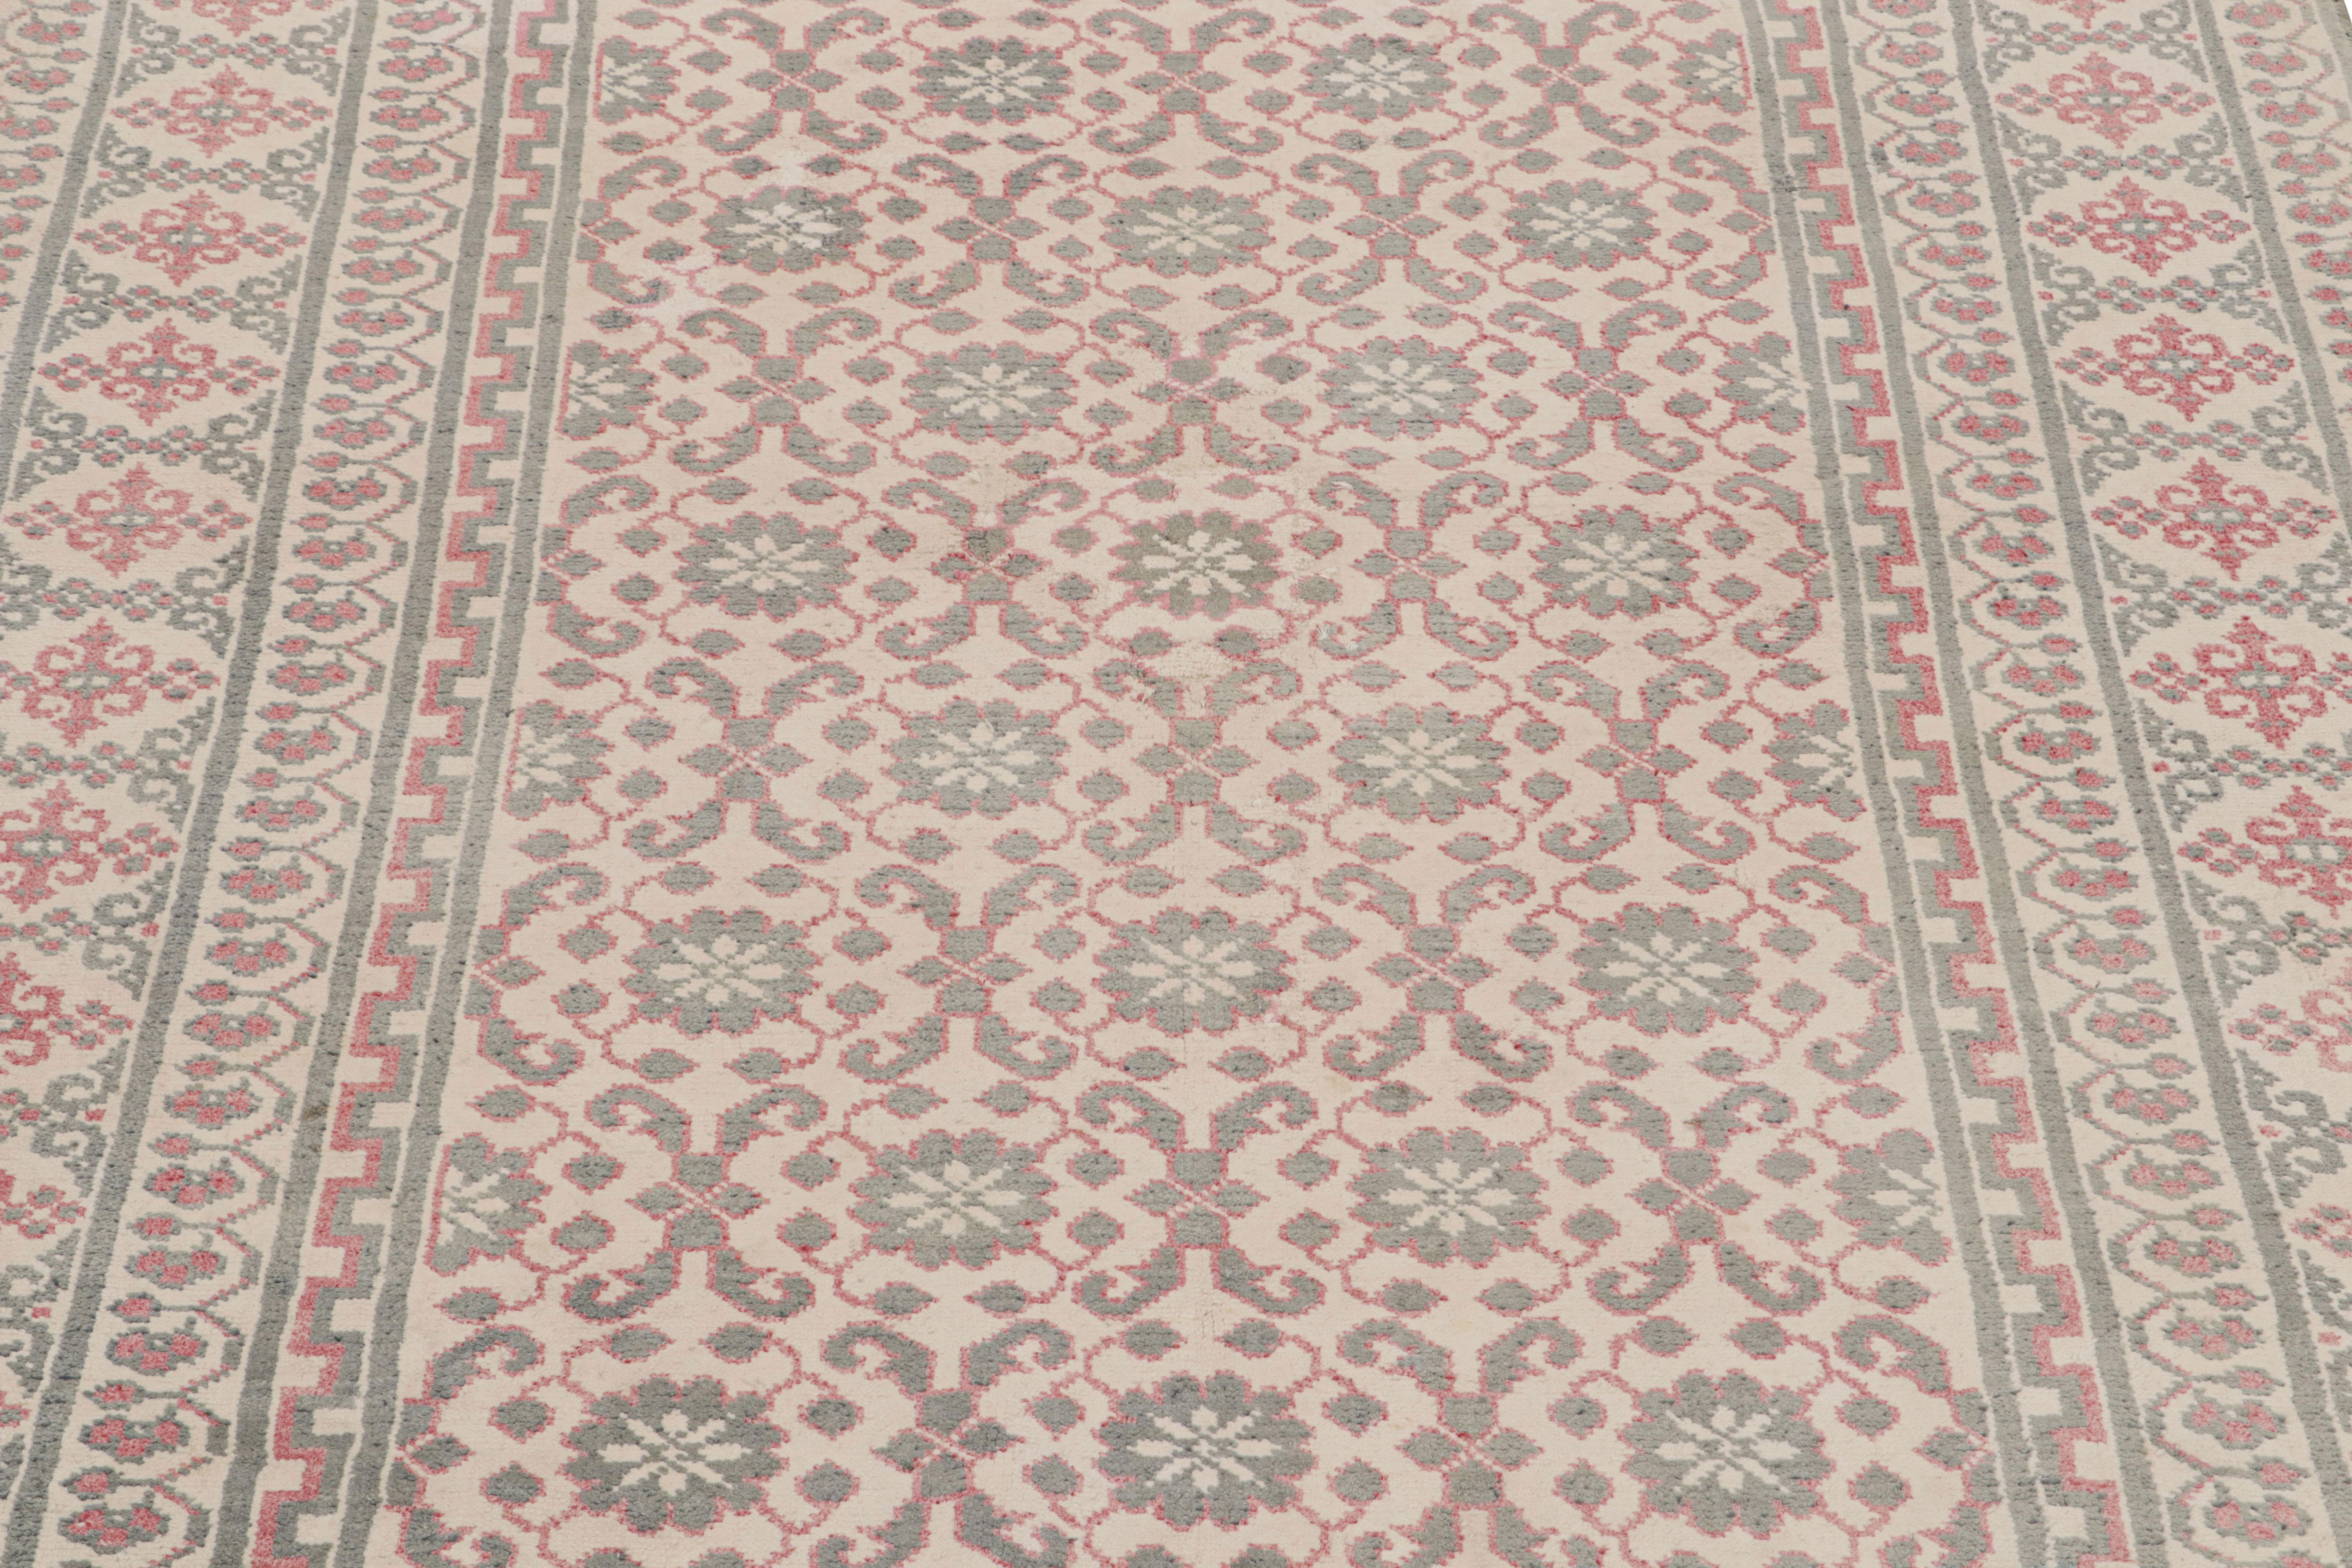 Antique Agra Rug in Cream with Gray and Red Floral Patterns, from Rug & Kilim In Good Condition For Sale In Long Island City, NY